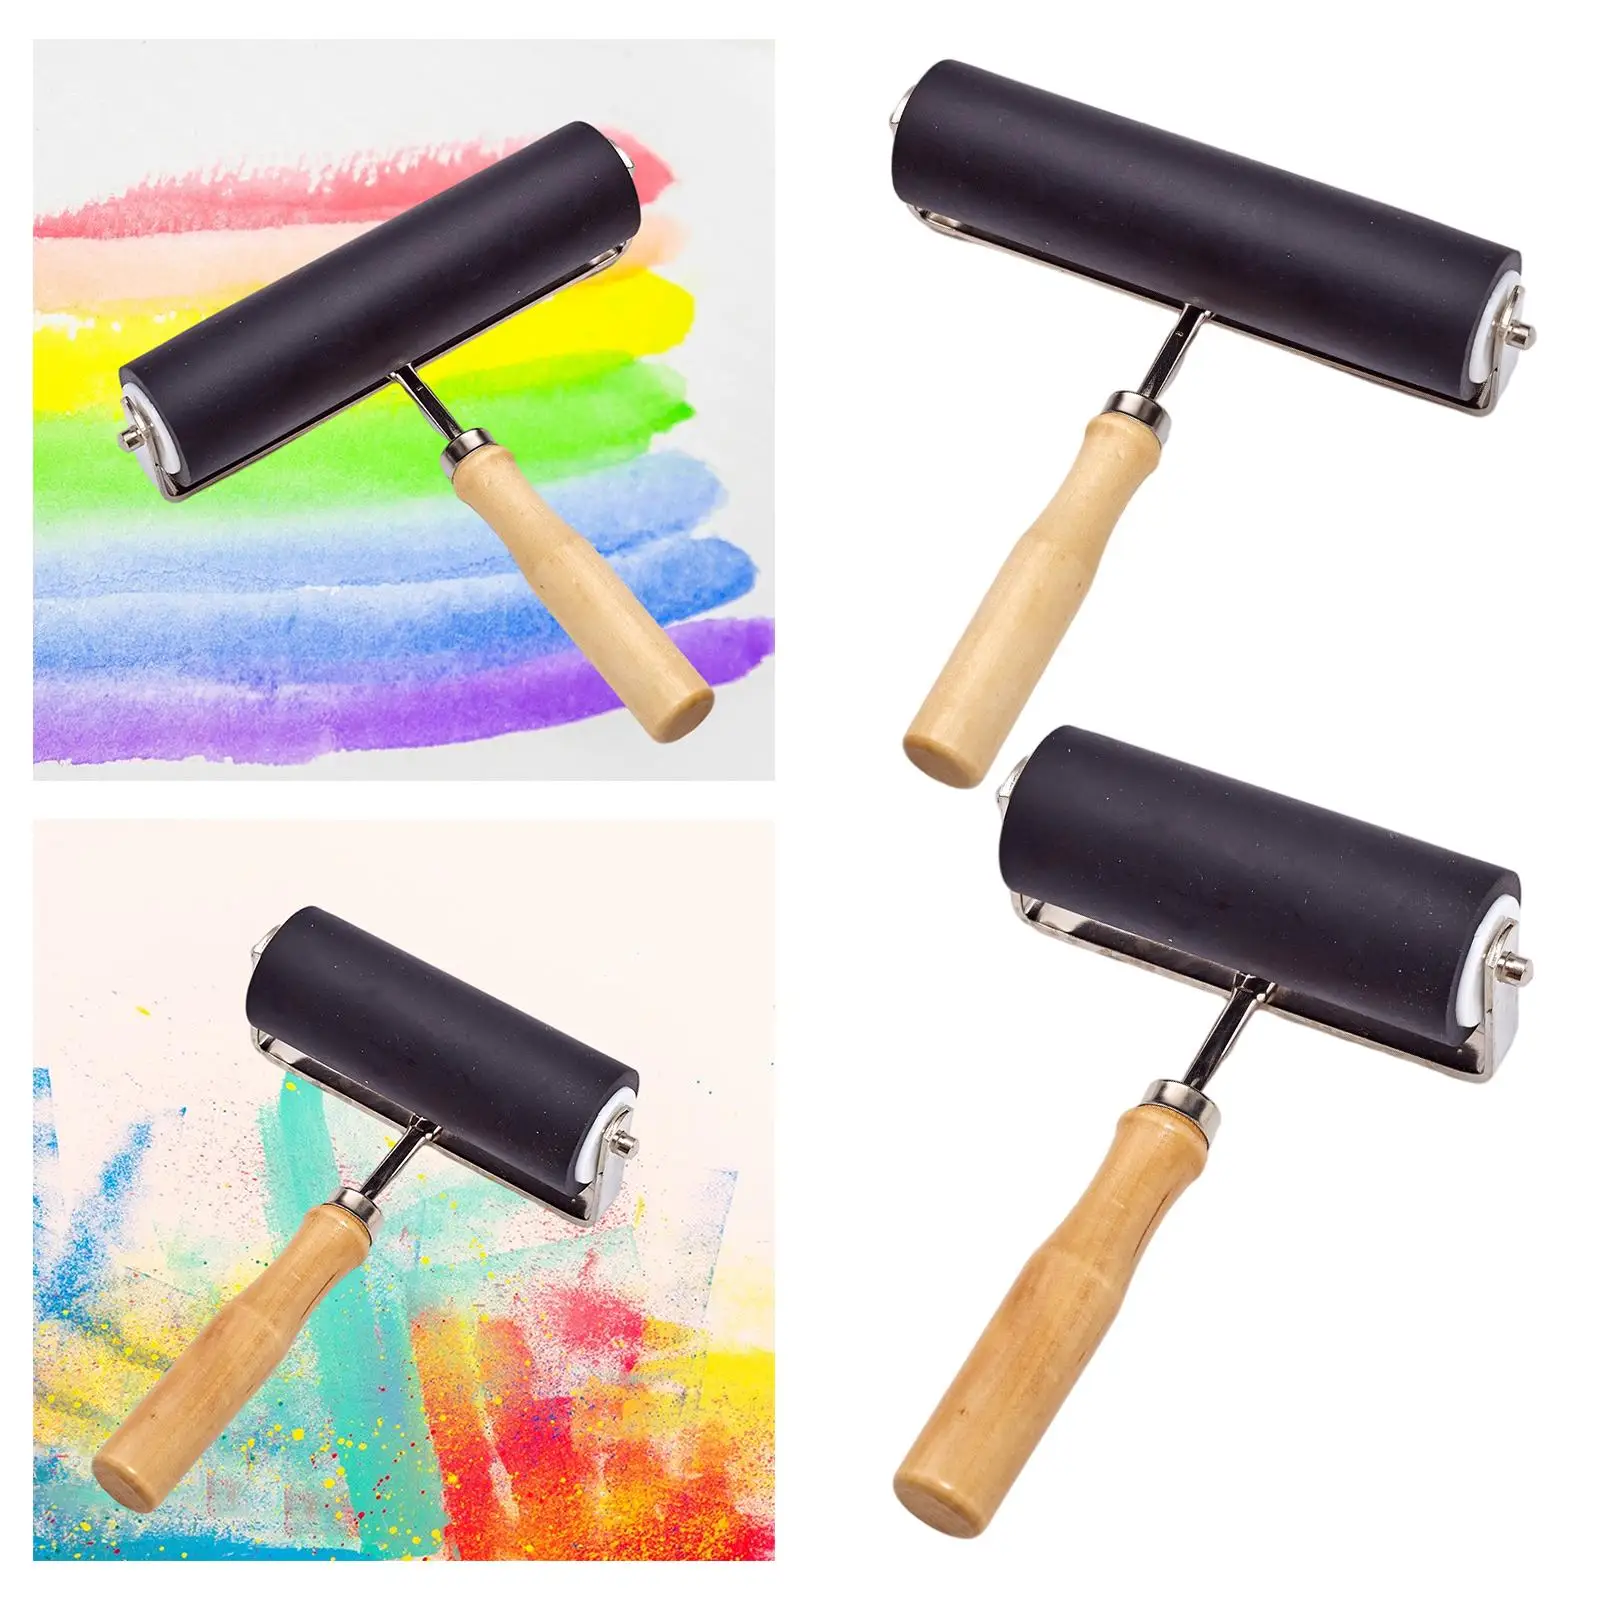 Black Rubber Roller  Tool Construction  Handle Tool Anti Skid for Printmaking Block Printing Oil Painting Mats Stamping